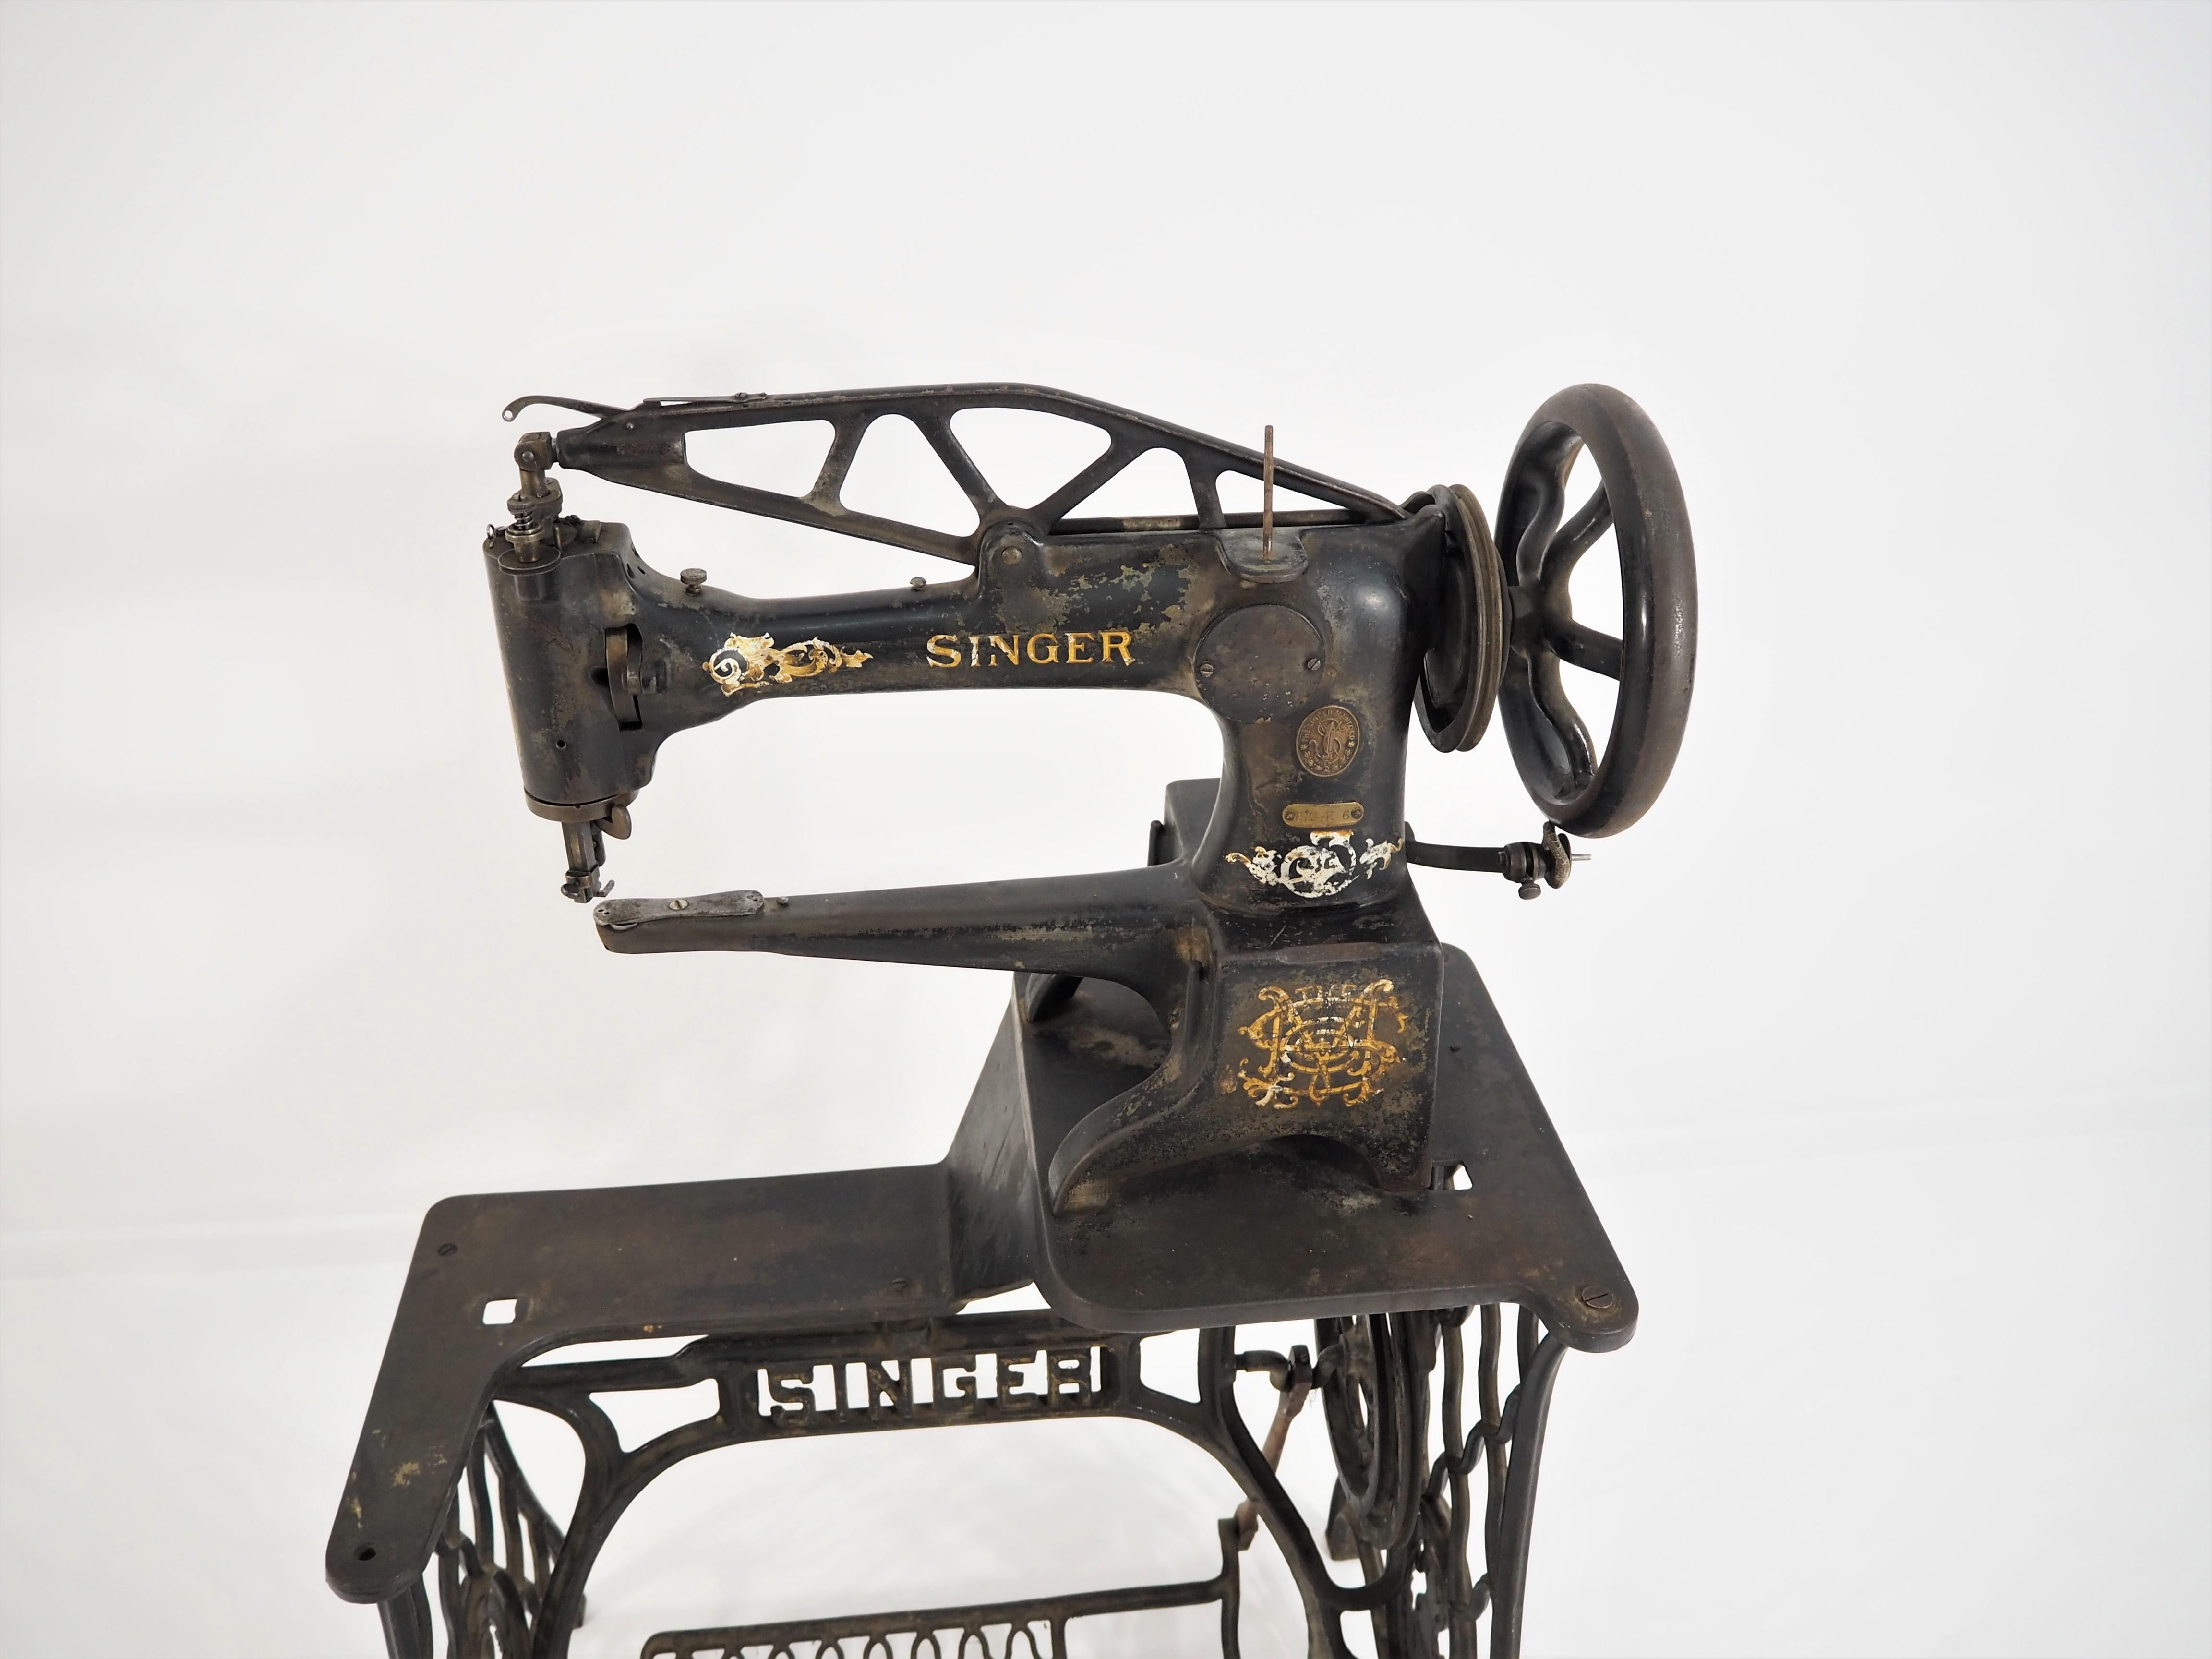 Art Nouveau sewing machine from Singer circa 1920s, dimensions: height 110cm, width 72 cm, depth 49 cm. A very nice decorative ornate Singer cobbler sewing machine on a treadle stand original condition.